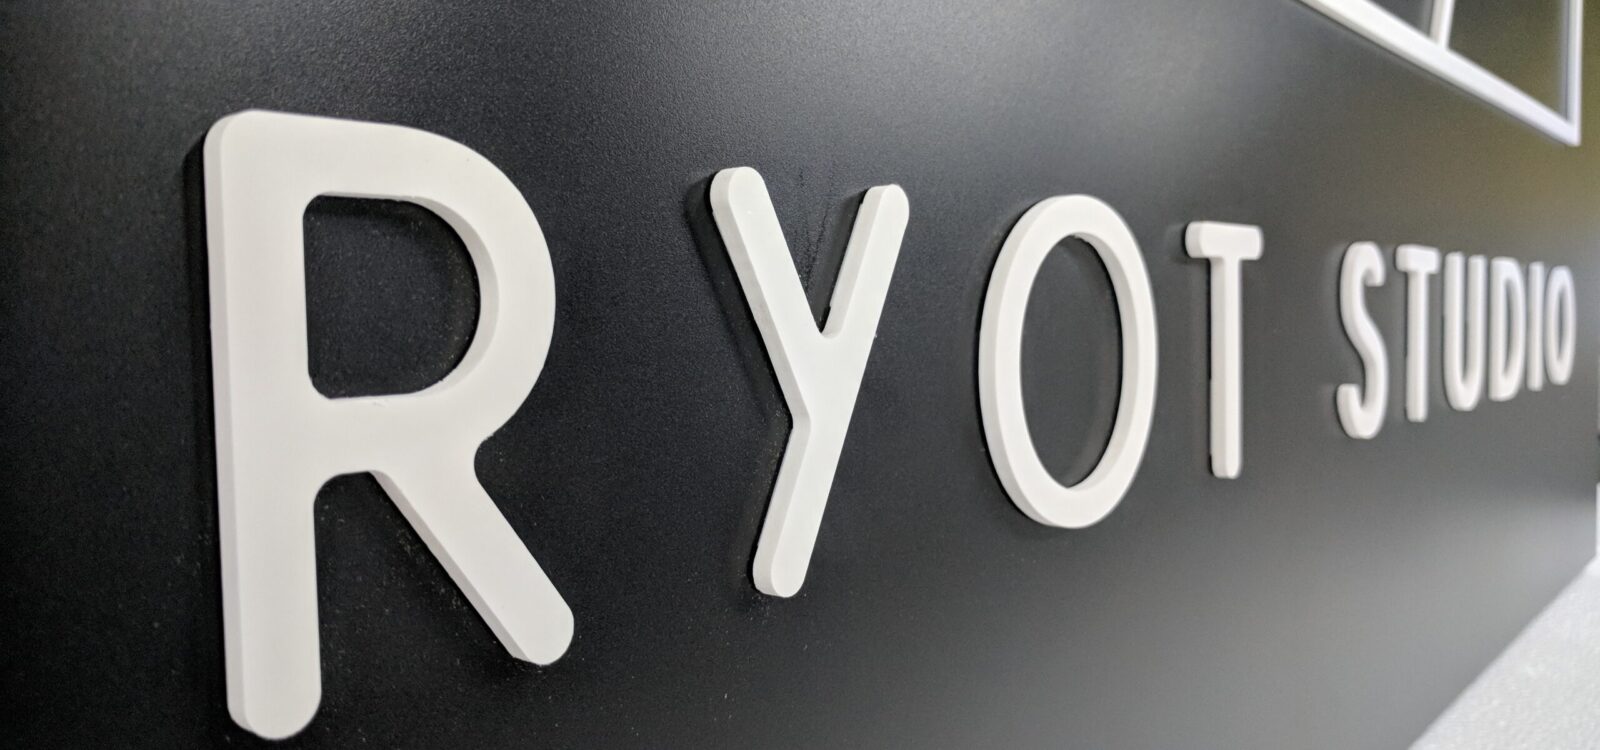 Close-Up Image Of The Foamex Faced Ryot Studio Logo